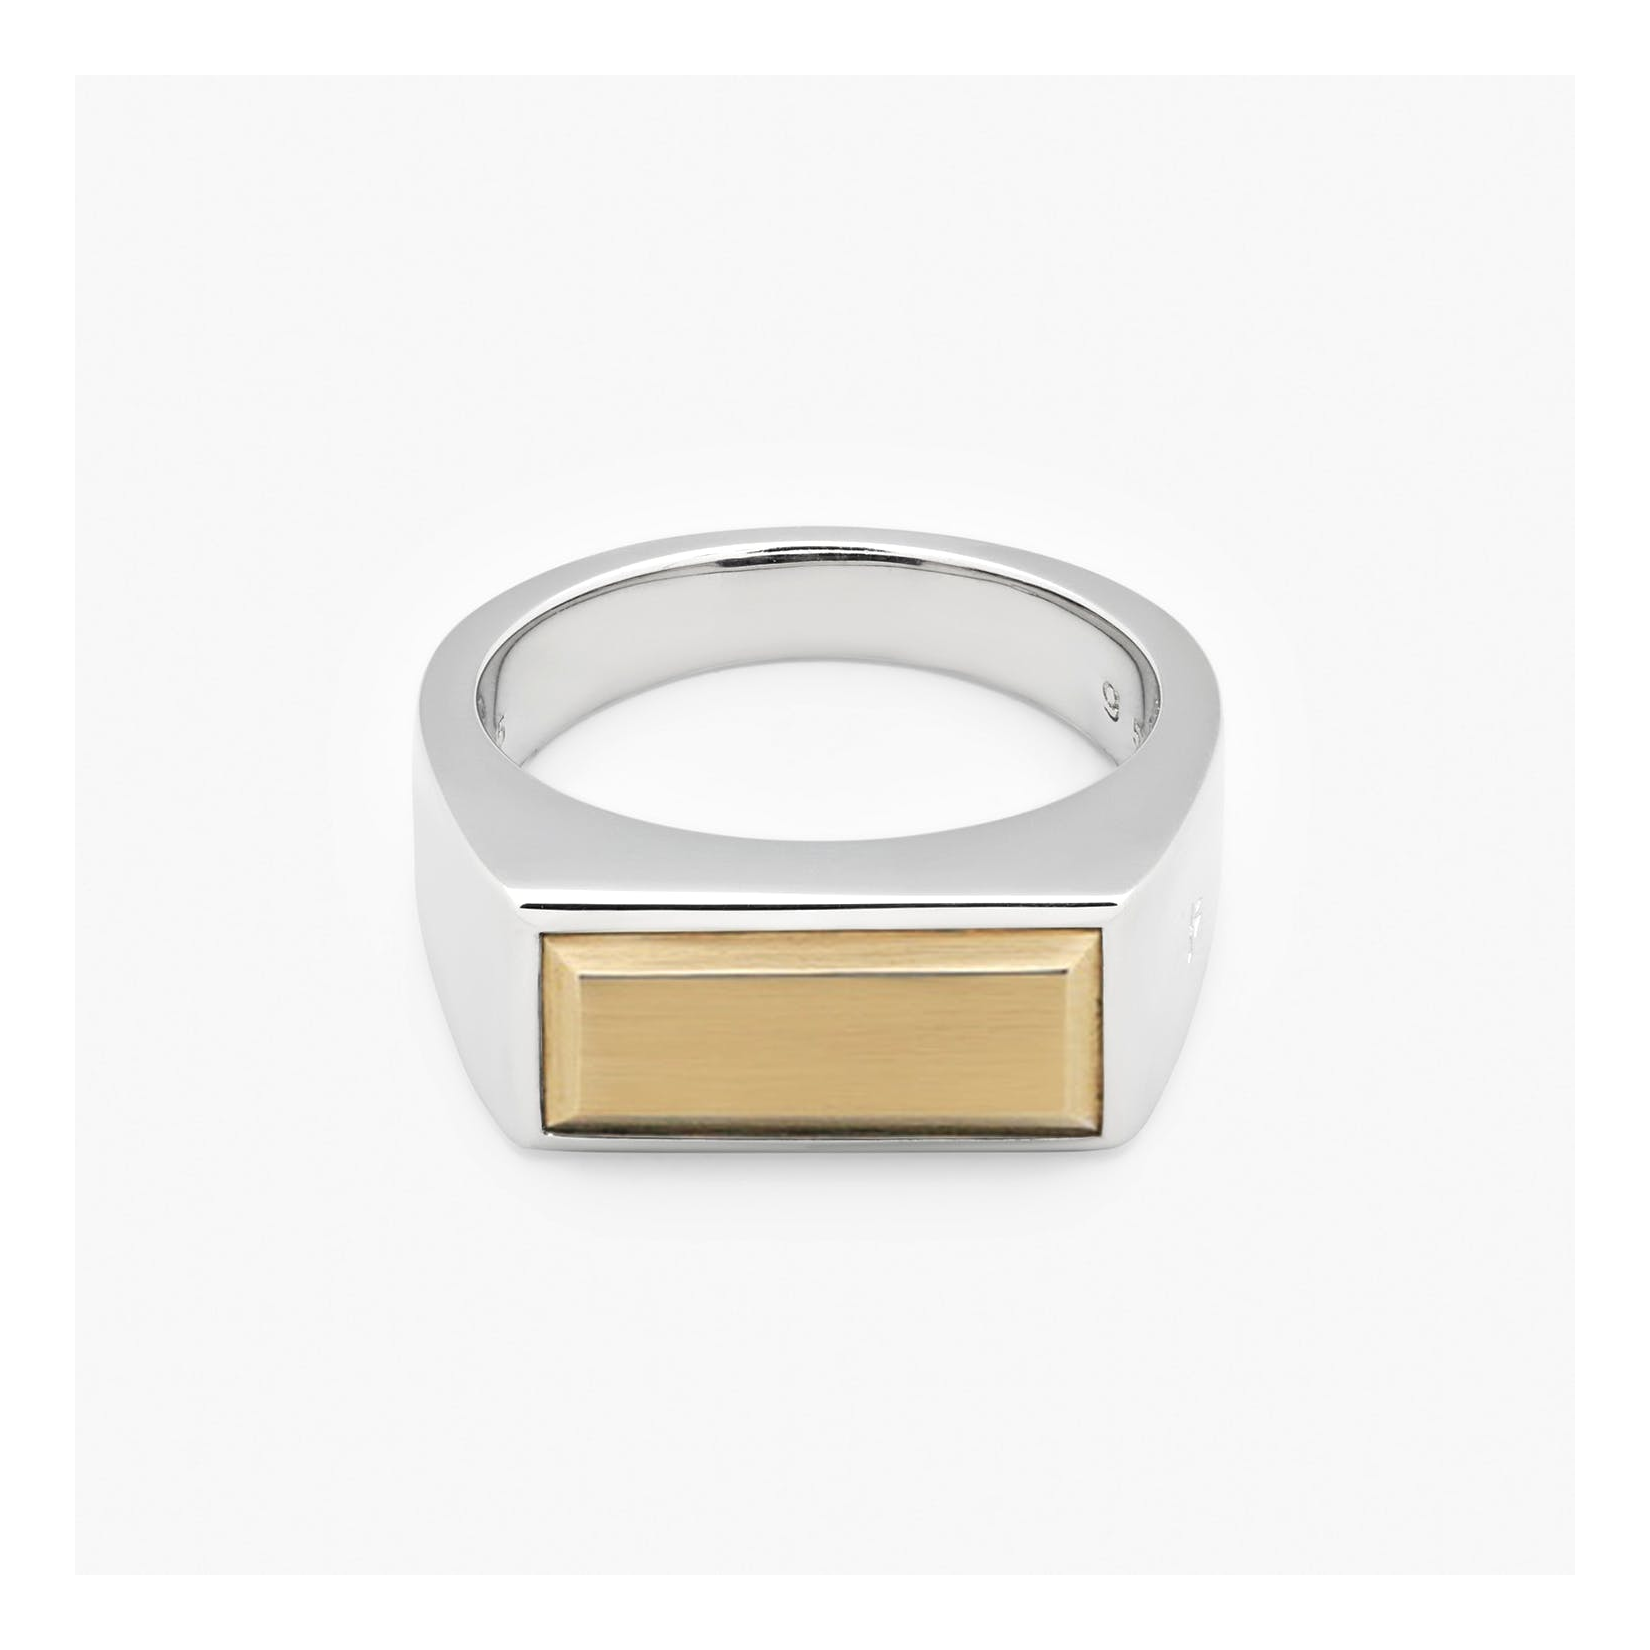 Silver Step sterling-silver & 9kt gold ring | Tom Wood | MATCHES UK